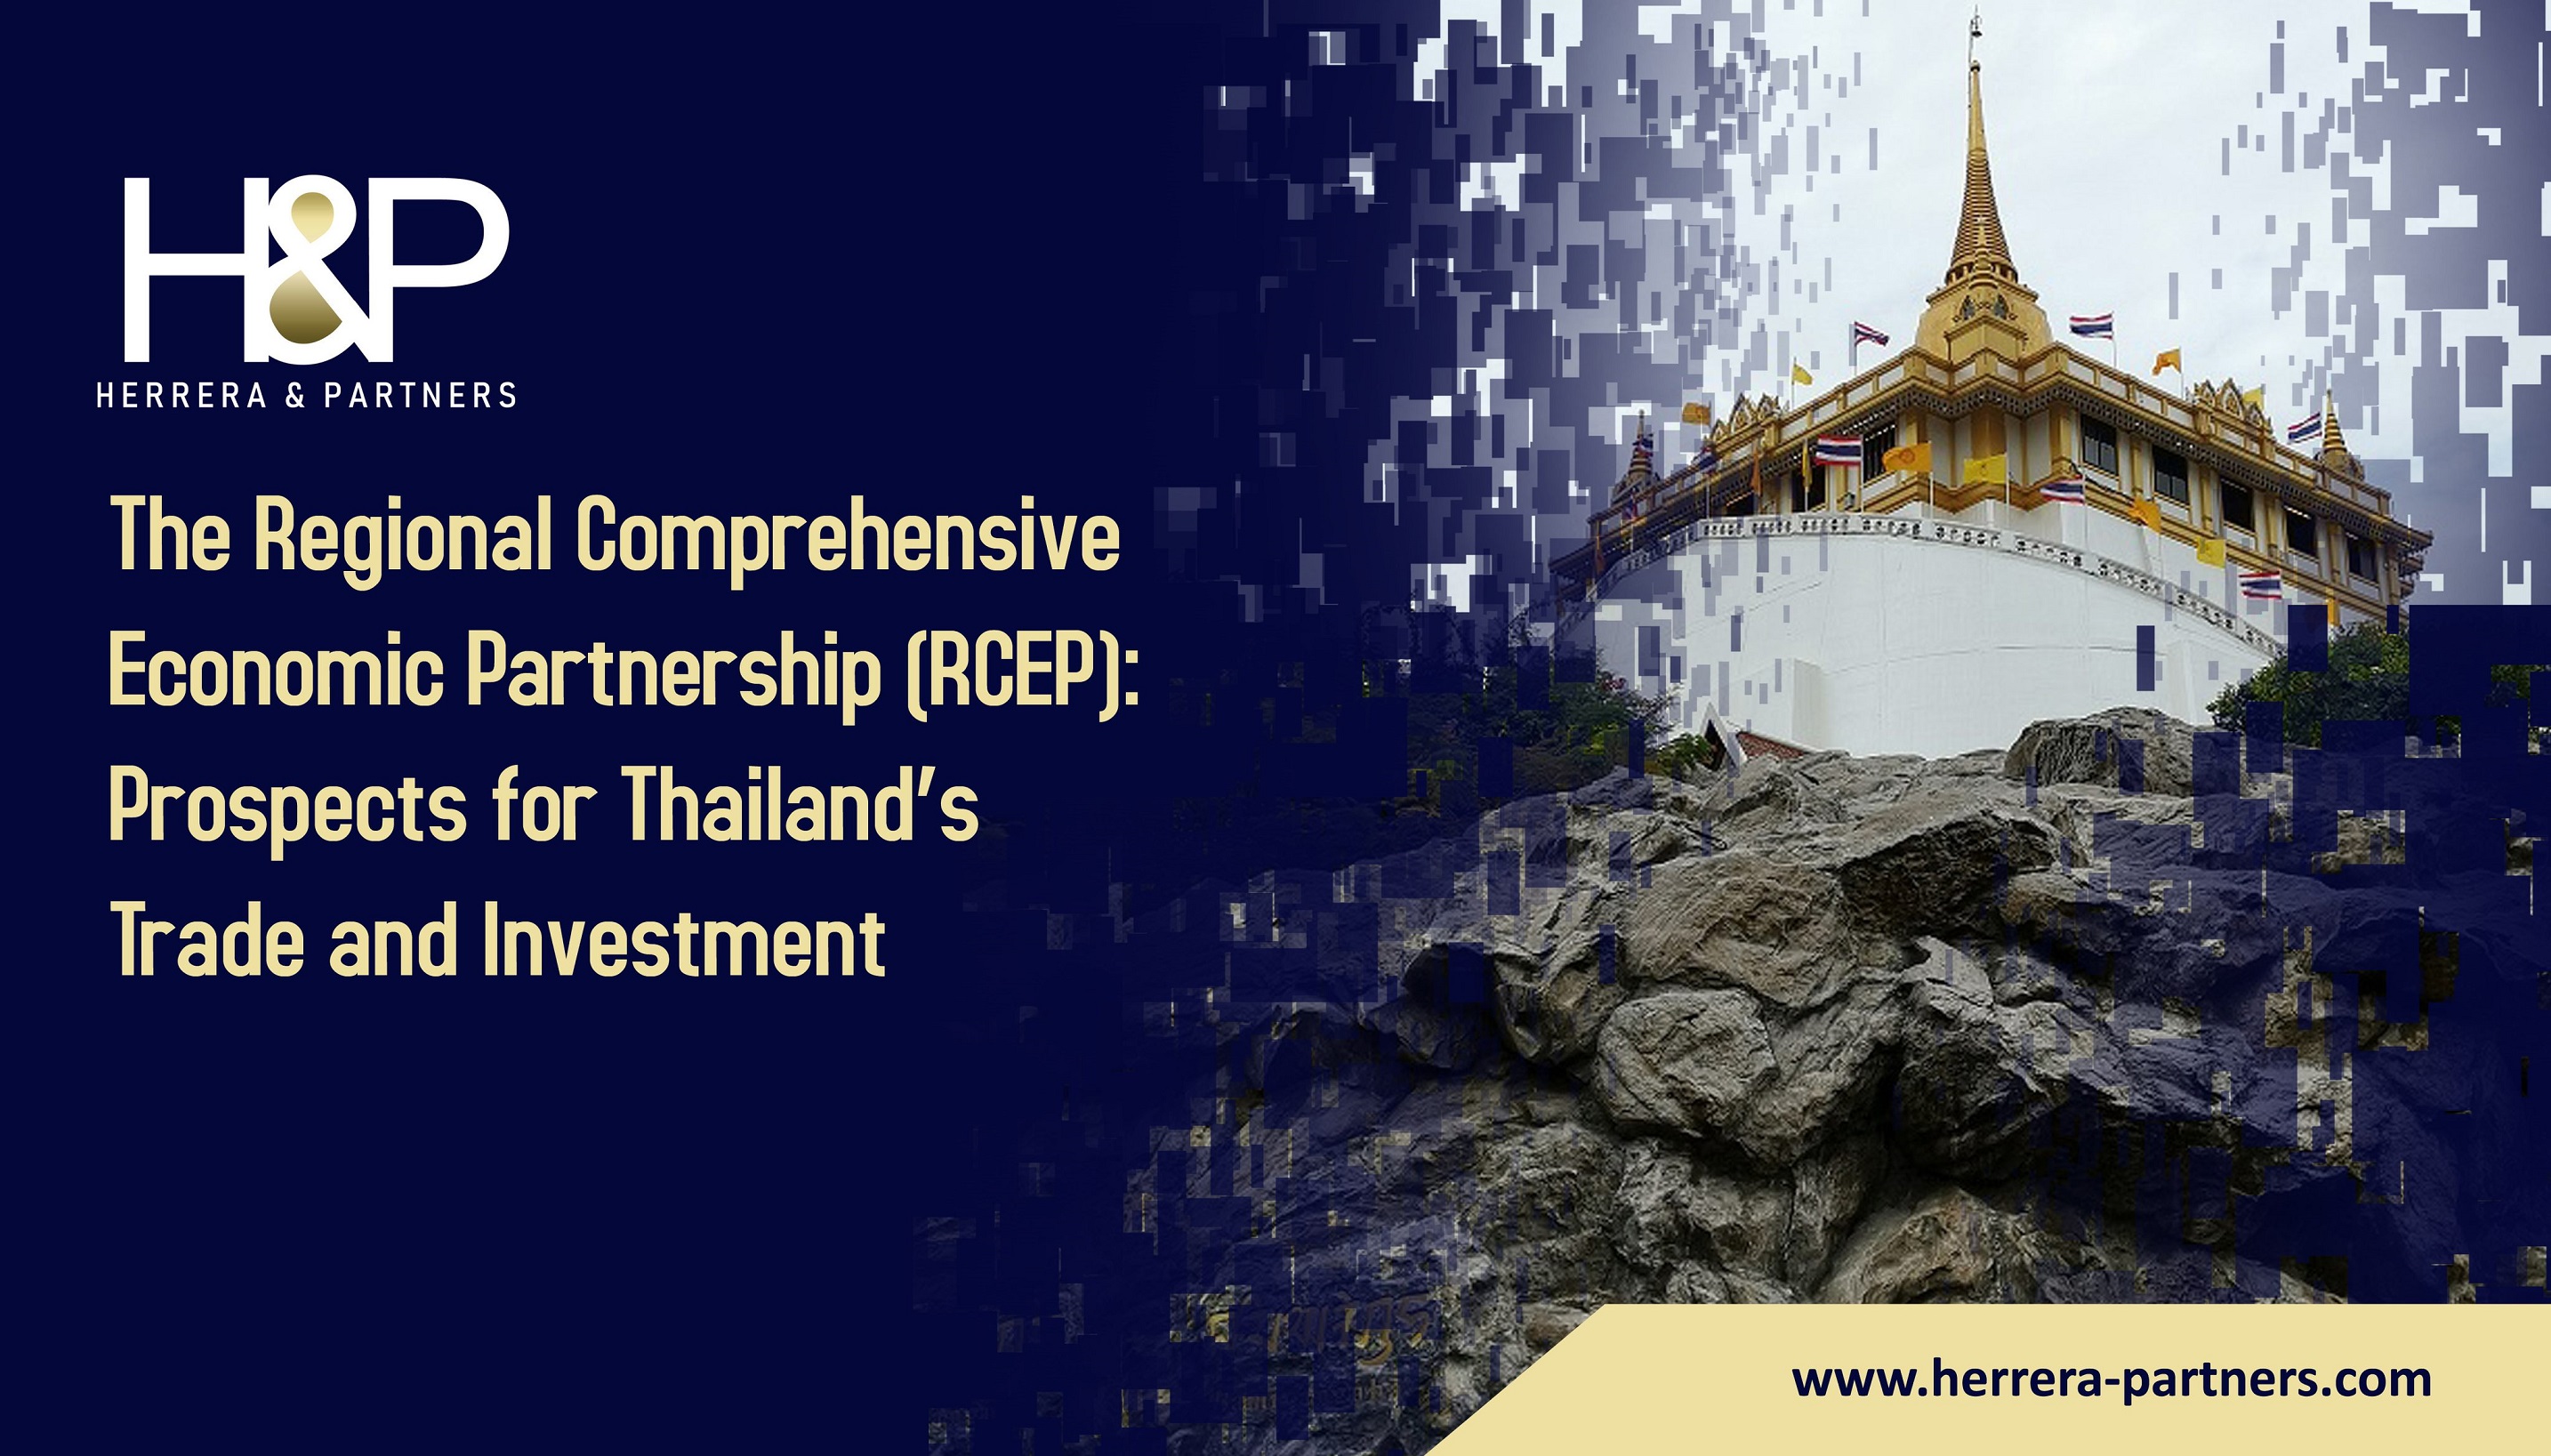 The Regional Comprehensive Economic Partnership (RCEP) Prospects for Thailand’s Trade and Investment H&P International corporate law firm in Thailand